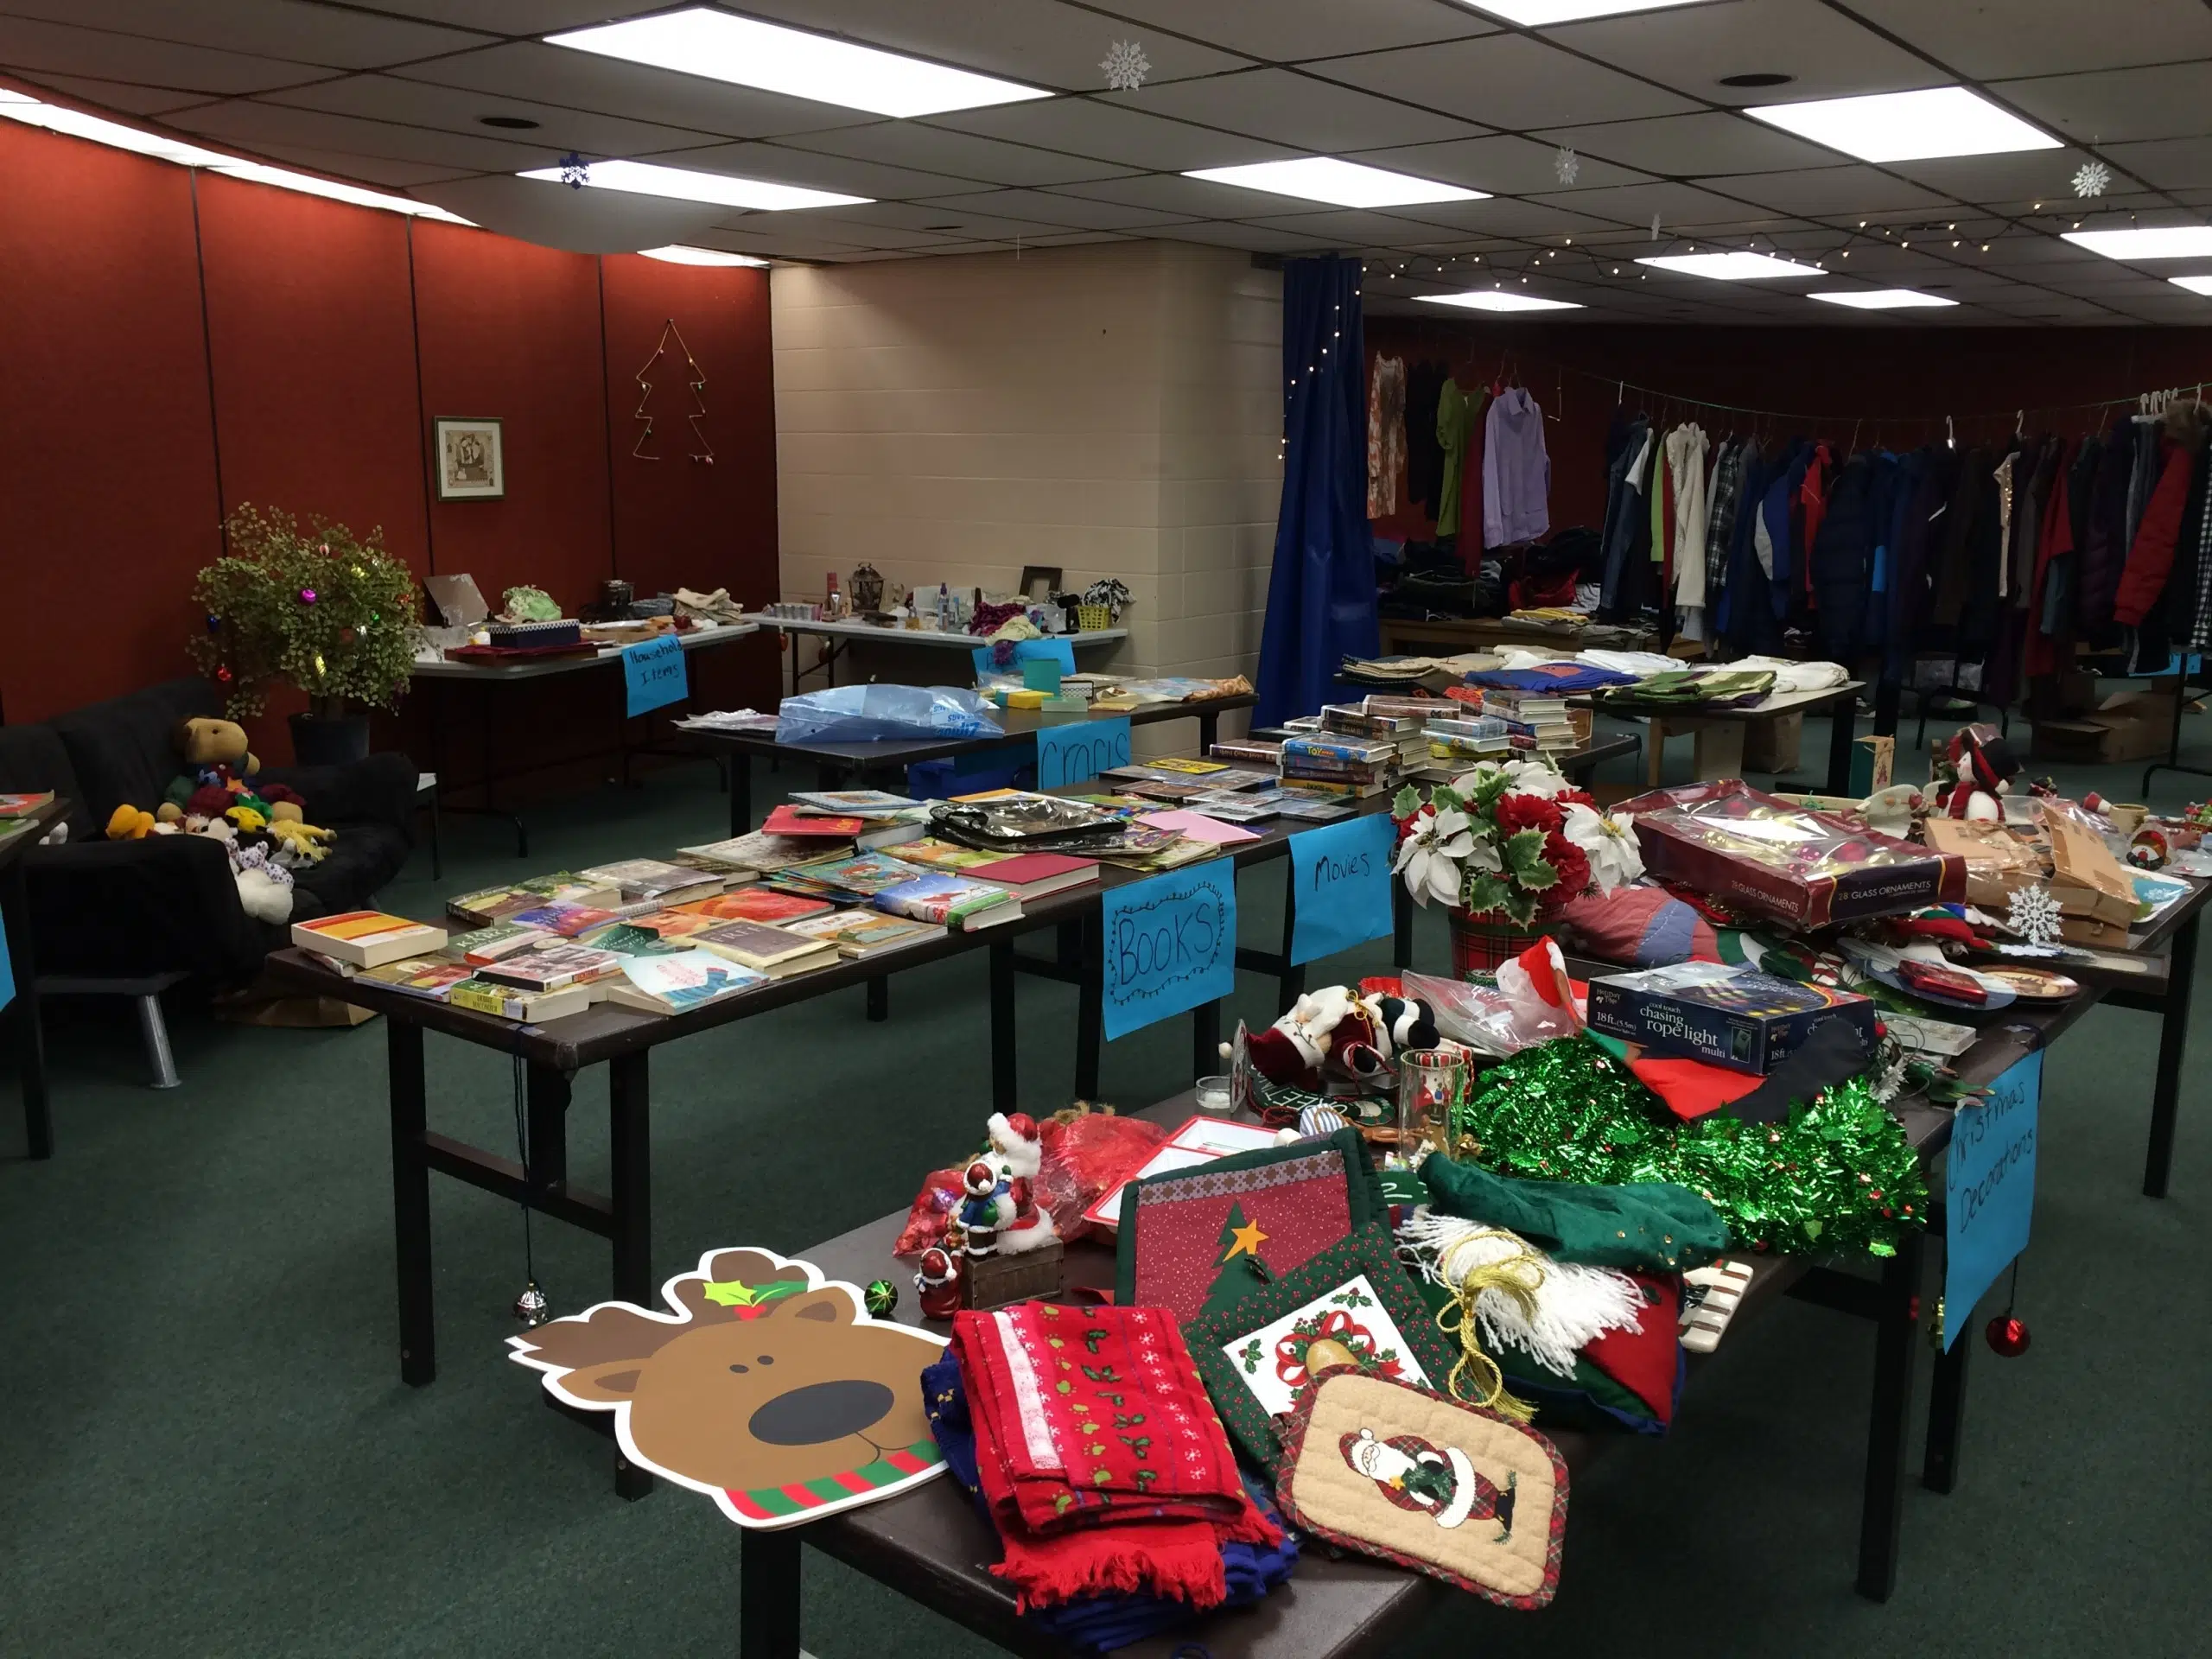 Second Chance Items Help Make Christmas Special For Local Middle School Families